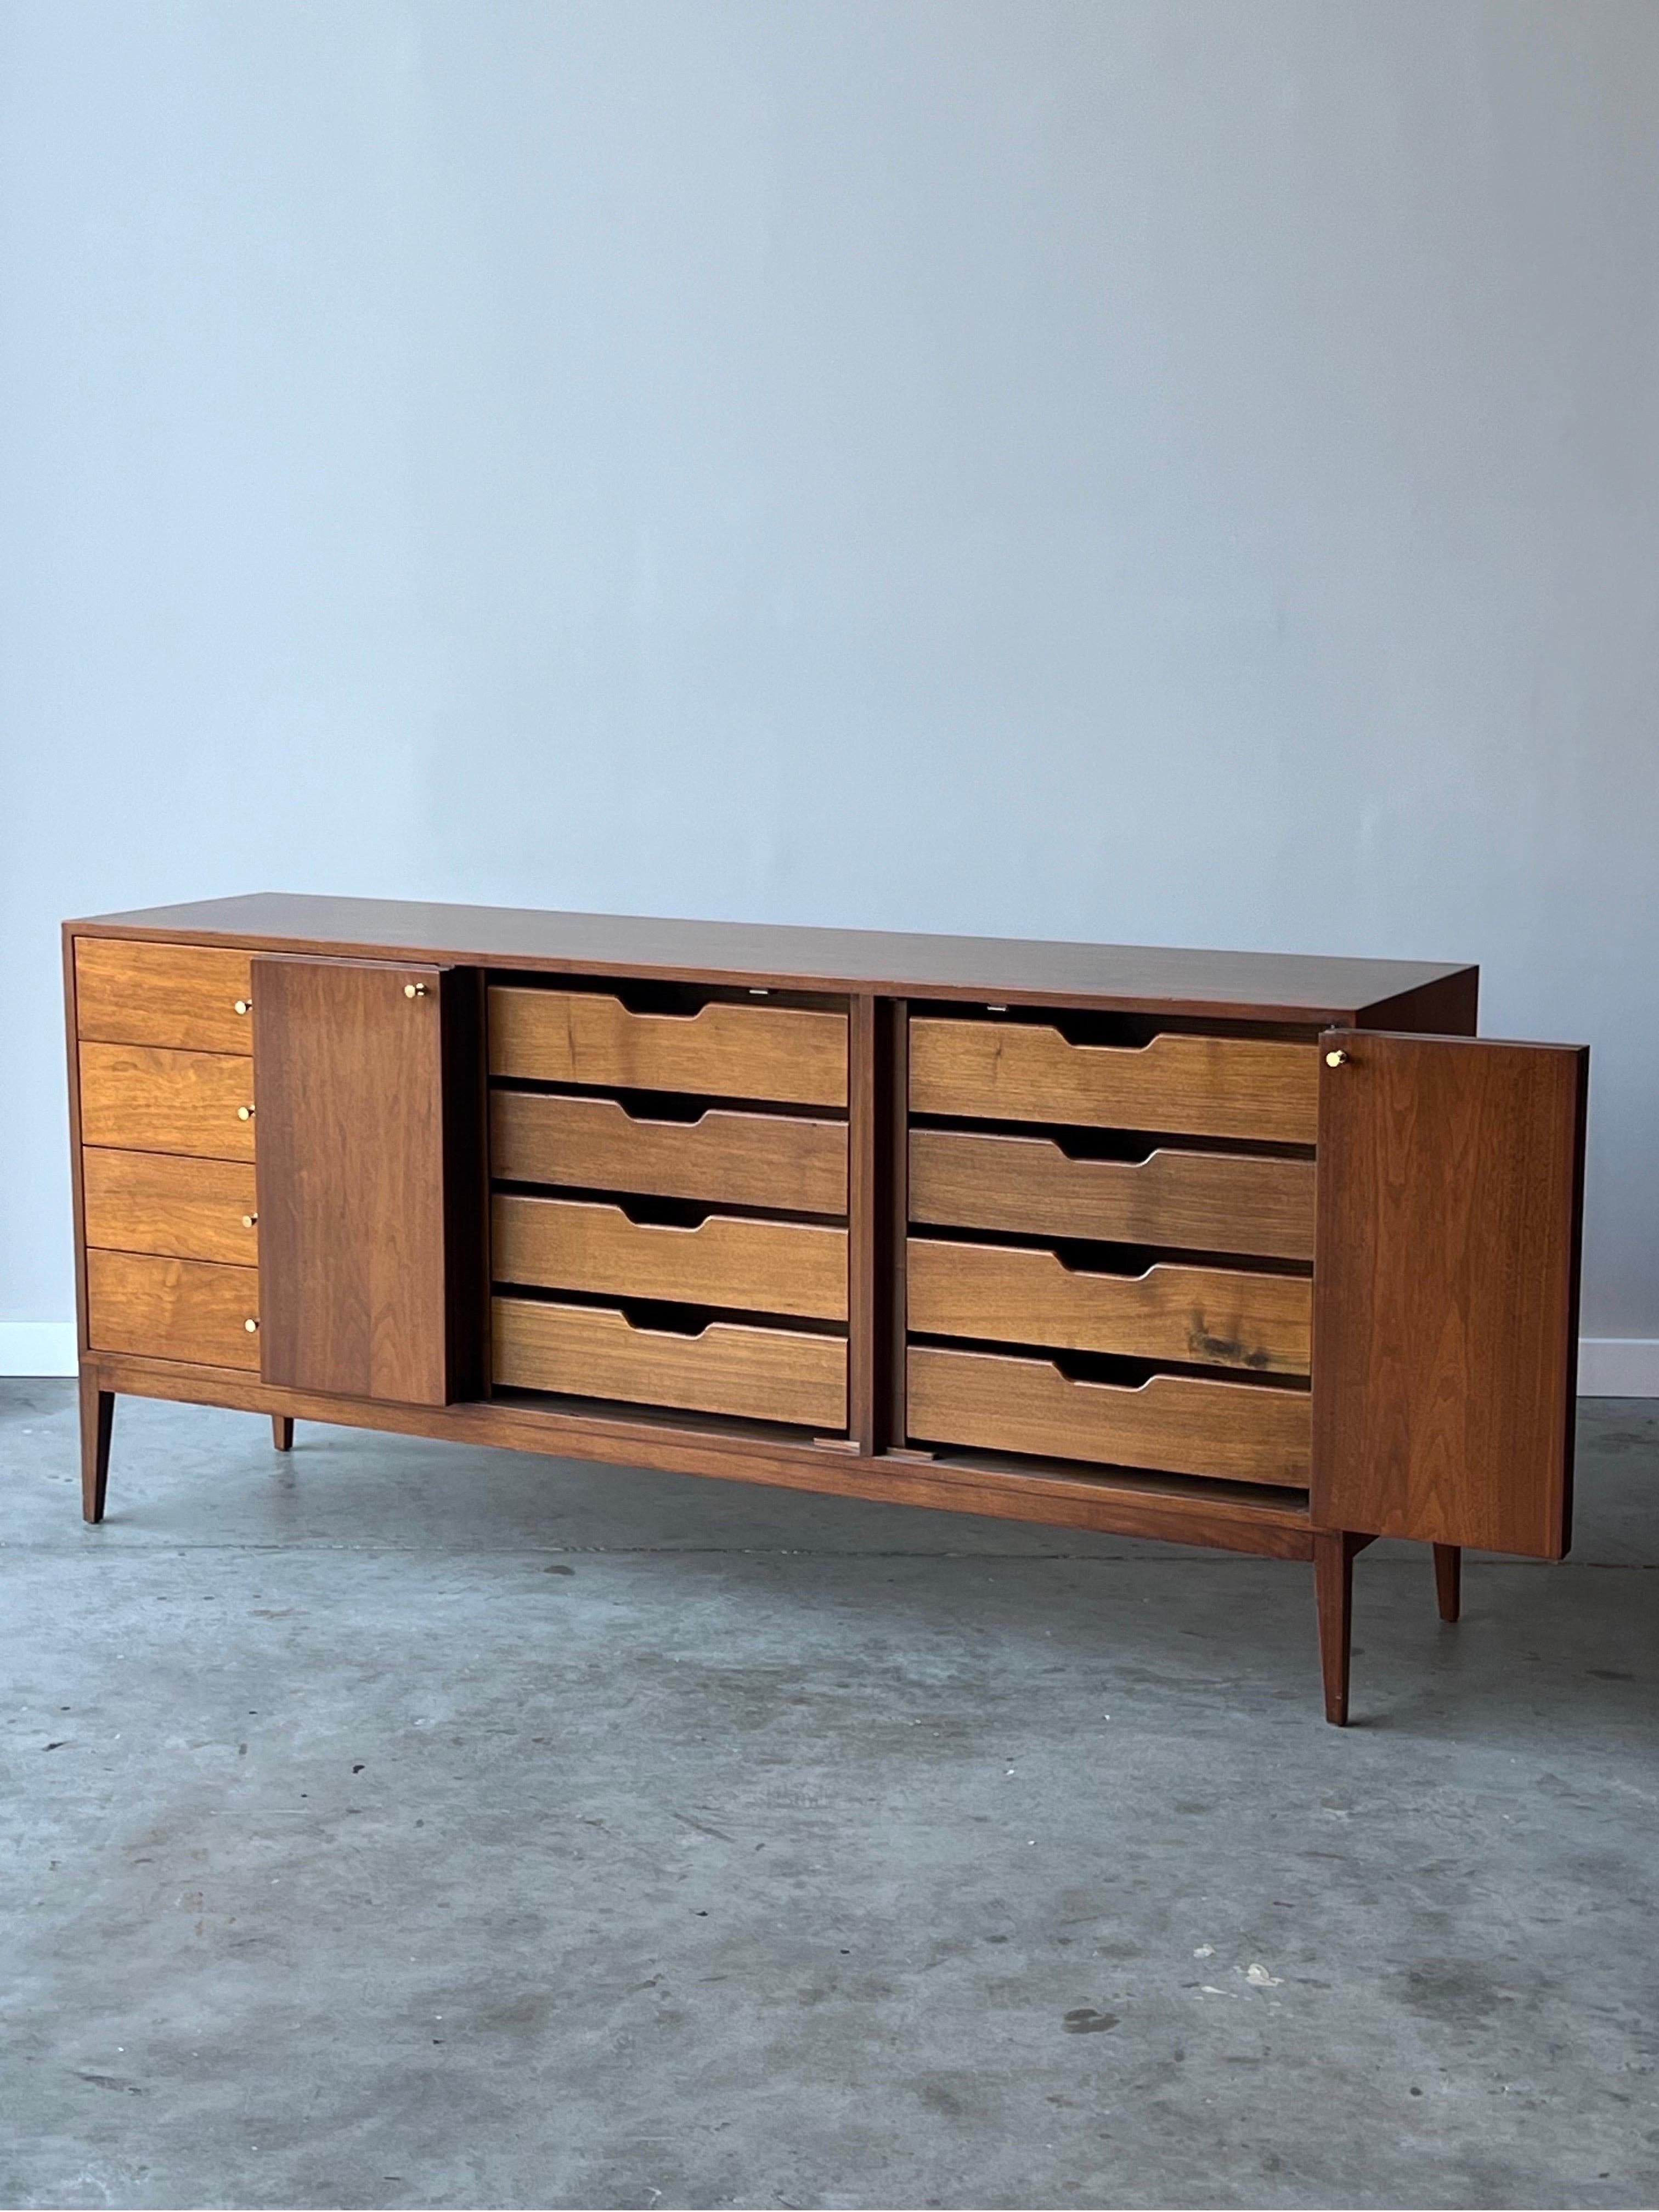 Mid-century long and large dresser in the style of Paul McCobb. This impressive piece is made from walnut and features twelve smooth-sliding drawers. Four drawers frame the left side of the piece accented with brass handles. Two bi-fold doors open